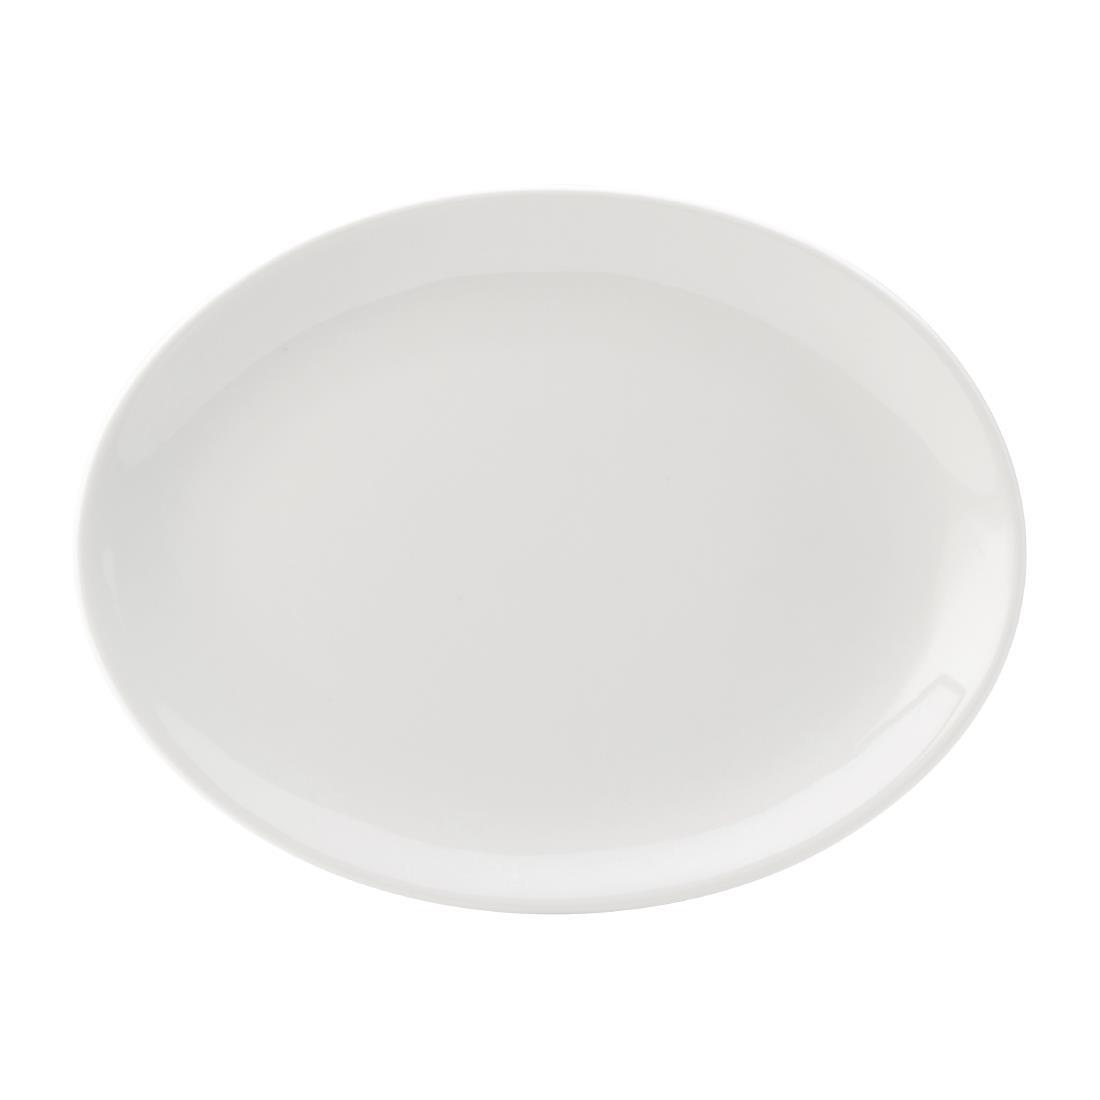 Utopia Titan Oval Plates White 300mm (Pack of 6) - DY325  - 1